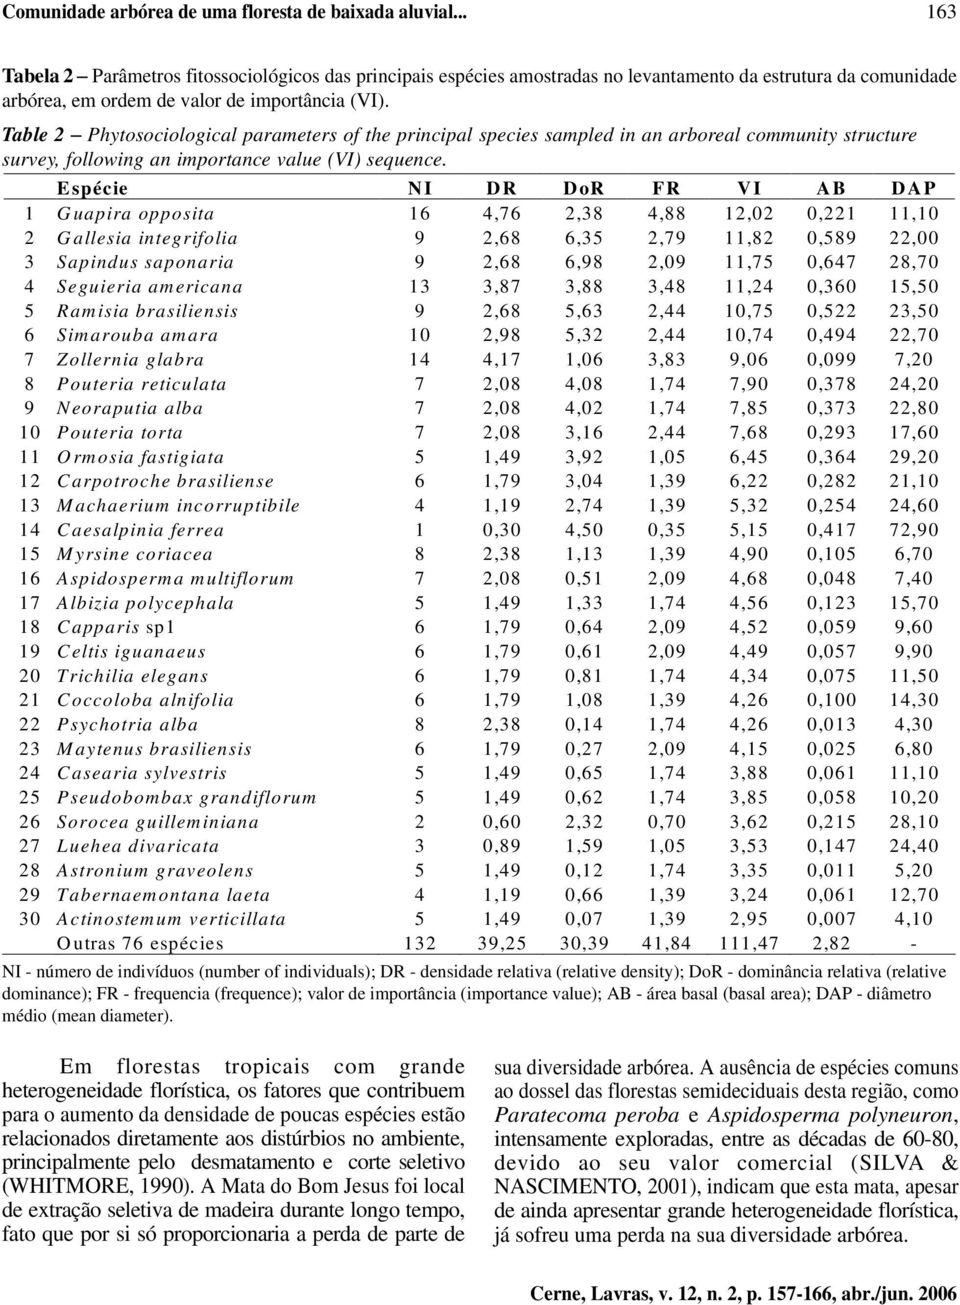 Table 2 Phytosociological parameters of the principal species sampled in an arboreal community structure survey, following an importance value (VI) sequence.